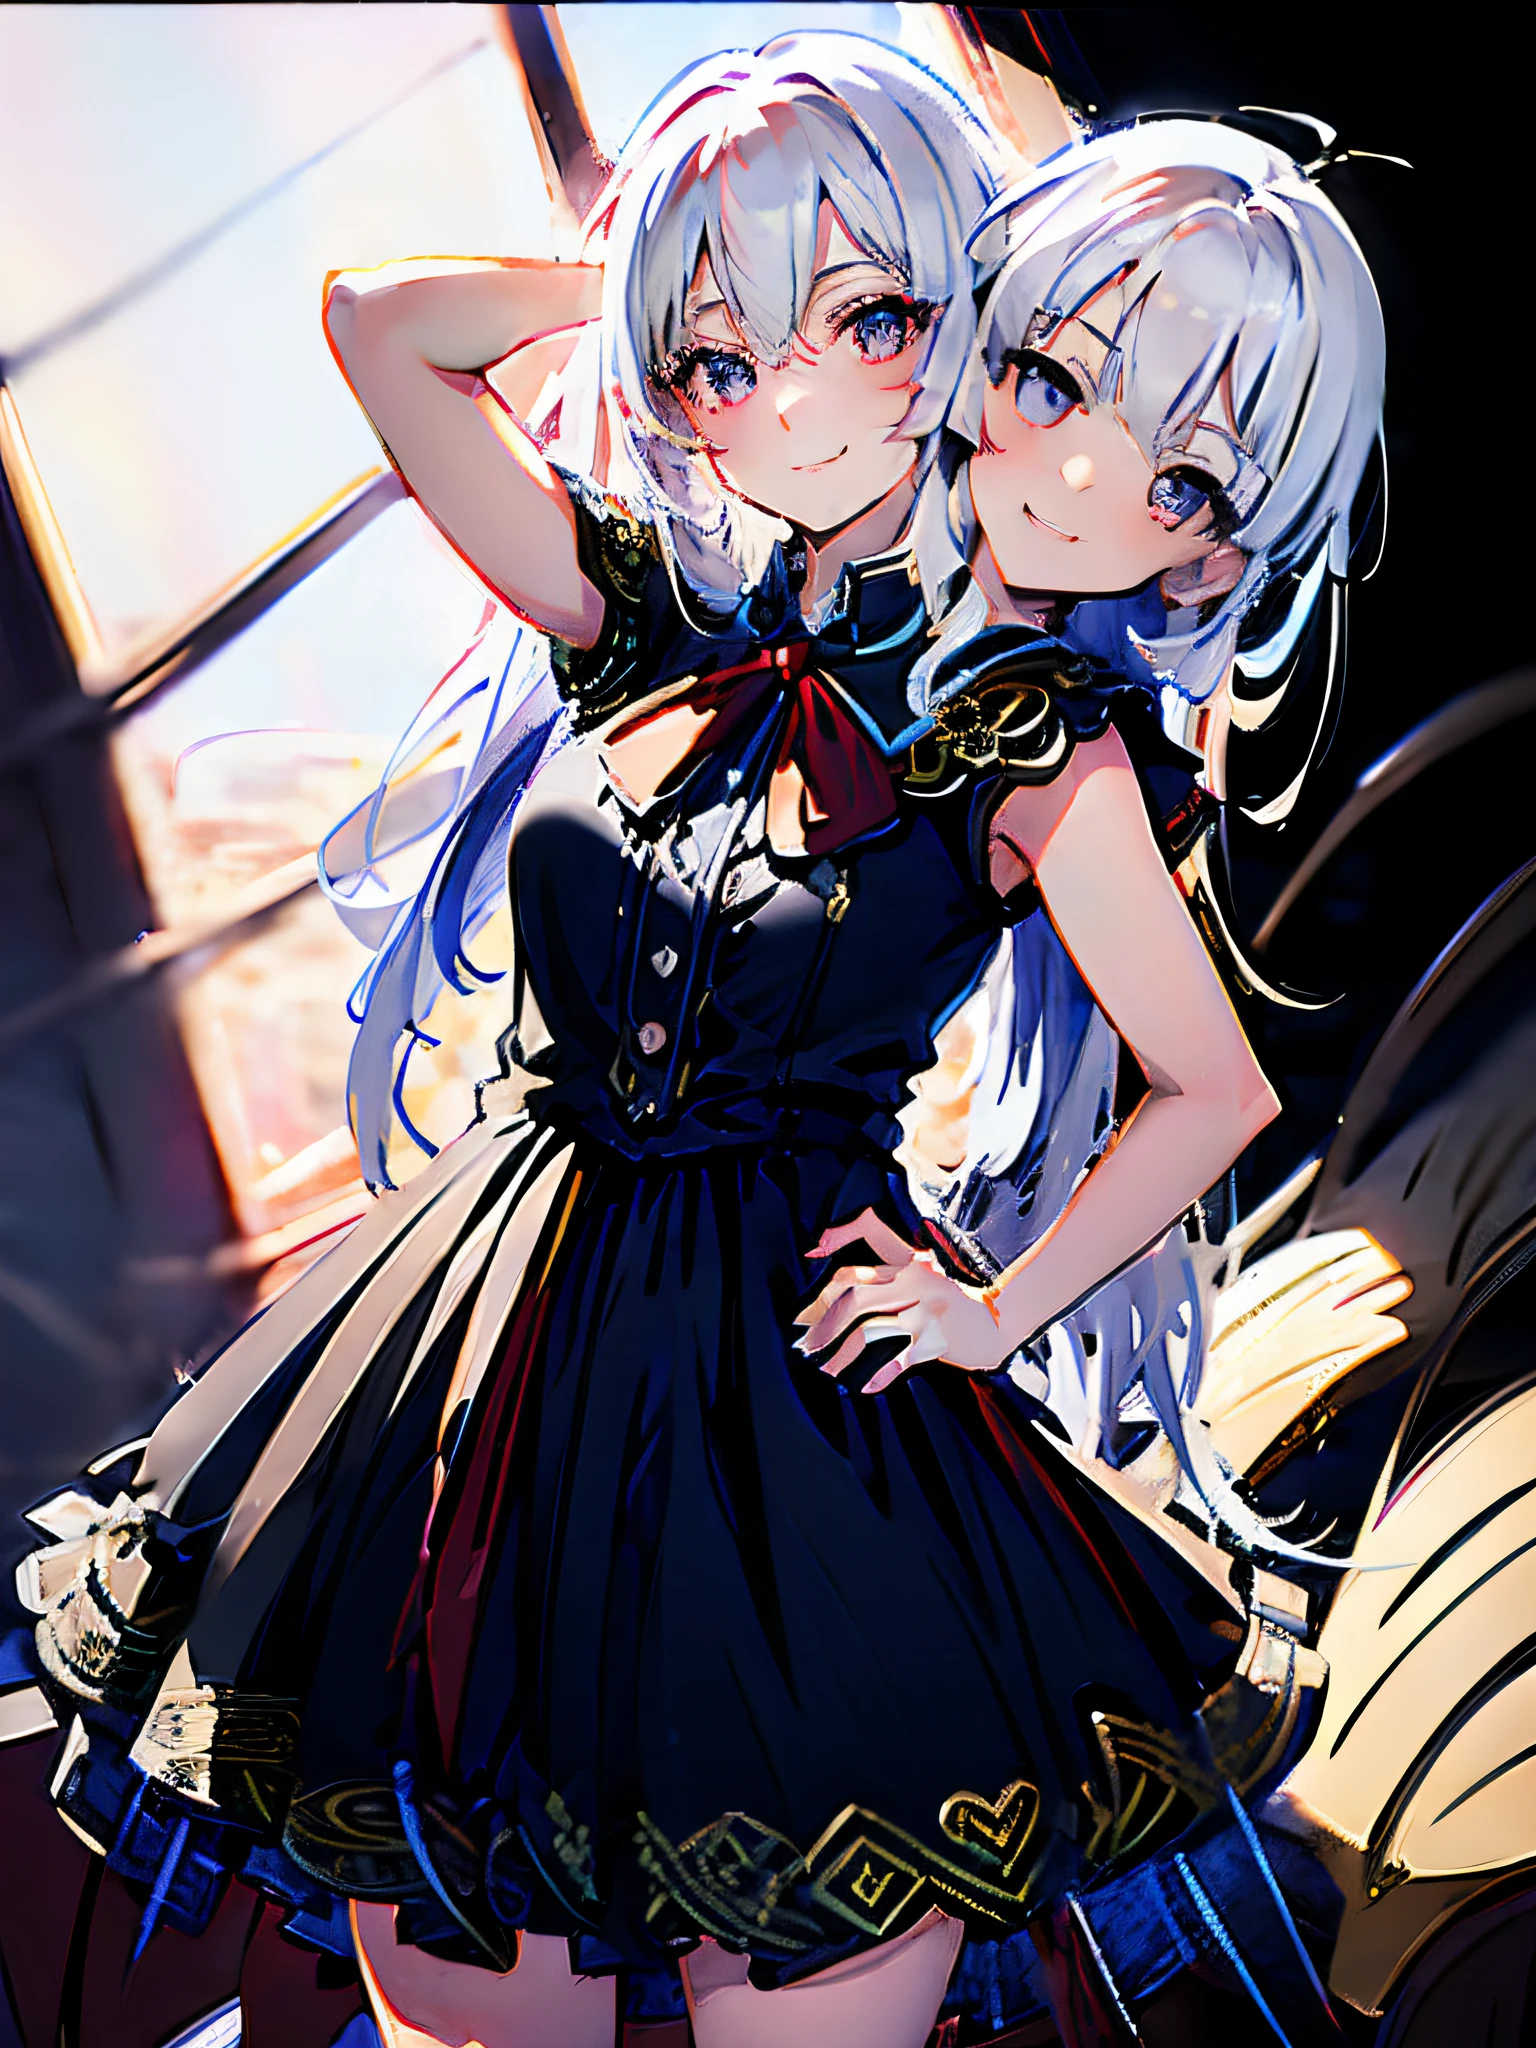 (highly detailed 8k wallpaper), best resolution, (2heads:1.5), elaina_\(majo_no_tabitabi\),anime girl with two heads, white hair, red eyes, winking, right hand behind head, left hand on hip, wearing a dress, left leg bent, standing pose, natural pose, studio, white room backdrop